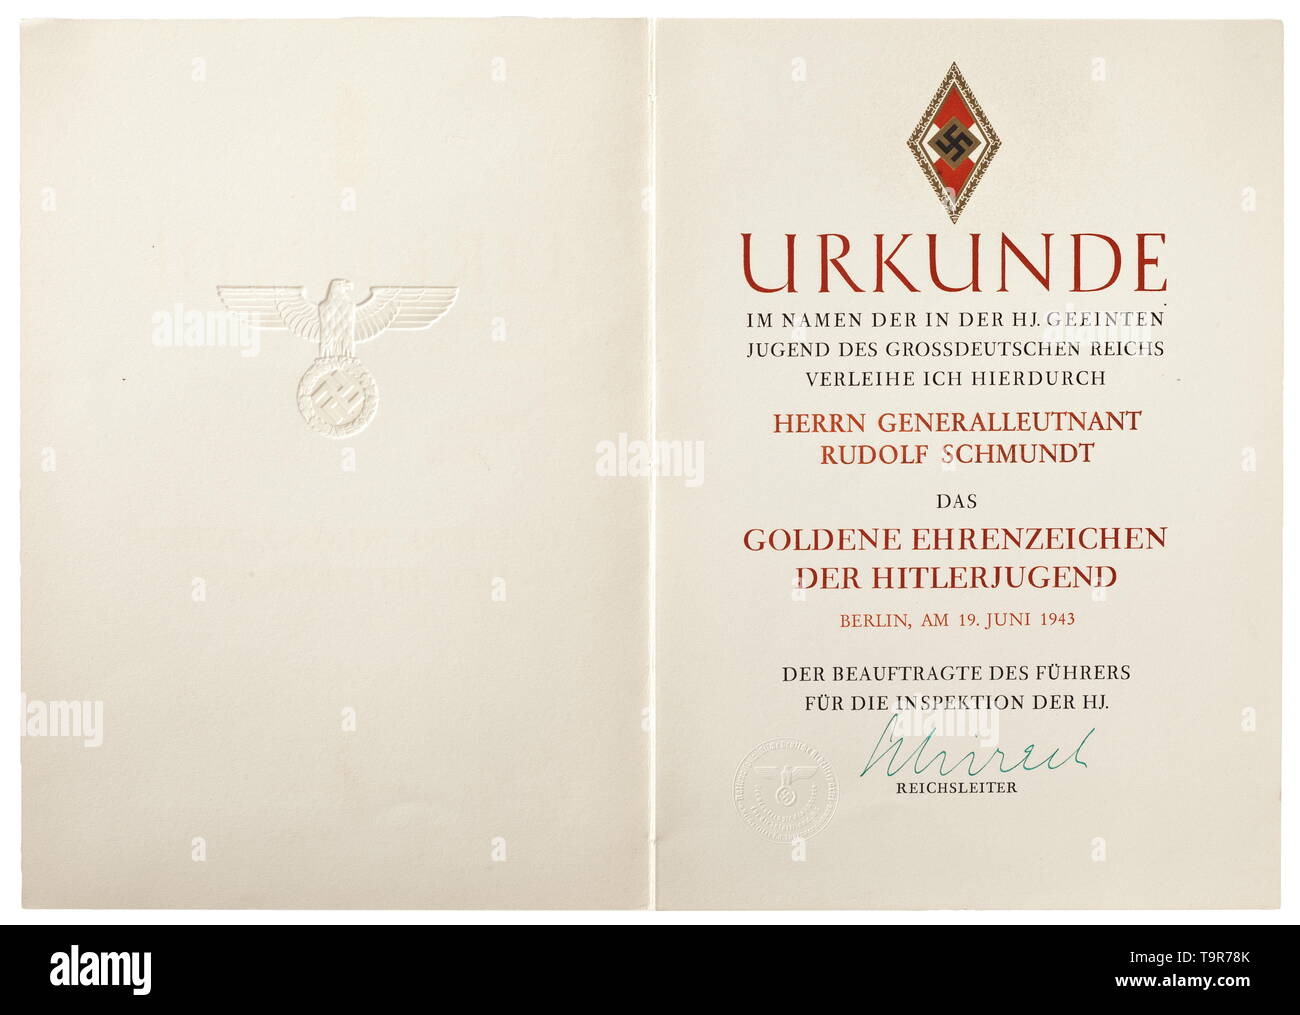 General of Infantry Rudolf Schmundt - an award document for the Golden Hitler Youth Badge of Honour Double-sided certificate in DIN A4 format, bound with thread stitching in the certificate folder, embossed with a national eagle. The text leaf printed in gold, terra-colour and black, at the head the HJ badge with a border of golden oak leaves. At the bottom, to the left of the signature of 'Reichsleiter' Baldur von Schirach in green ink, the embossed seal of the 'Beauftragter des Führers für die Inspektion der HJ' (tr. 'Authorised Representative of the Führer for the Inspec, Editorial-Use-Only Stock Photo